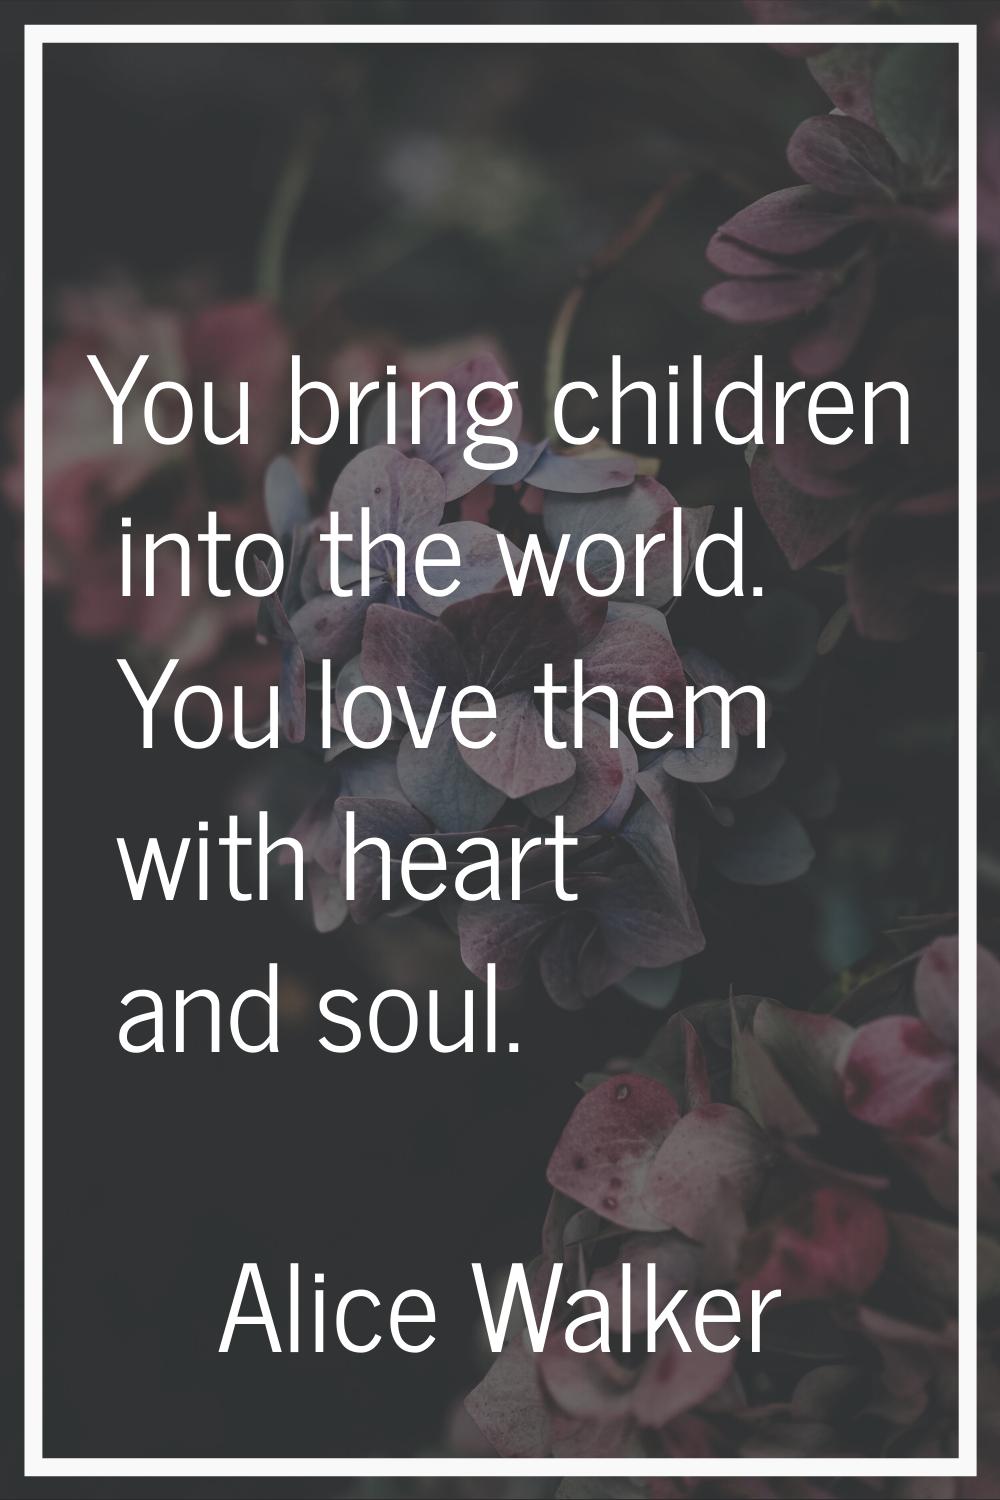 You bring children into the world. You love them with heart and soul.